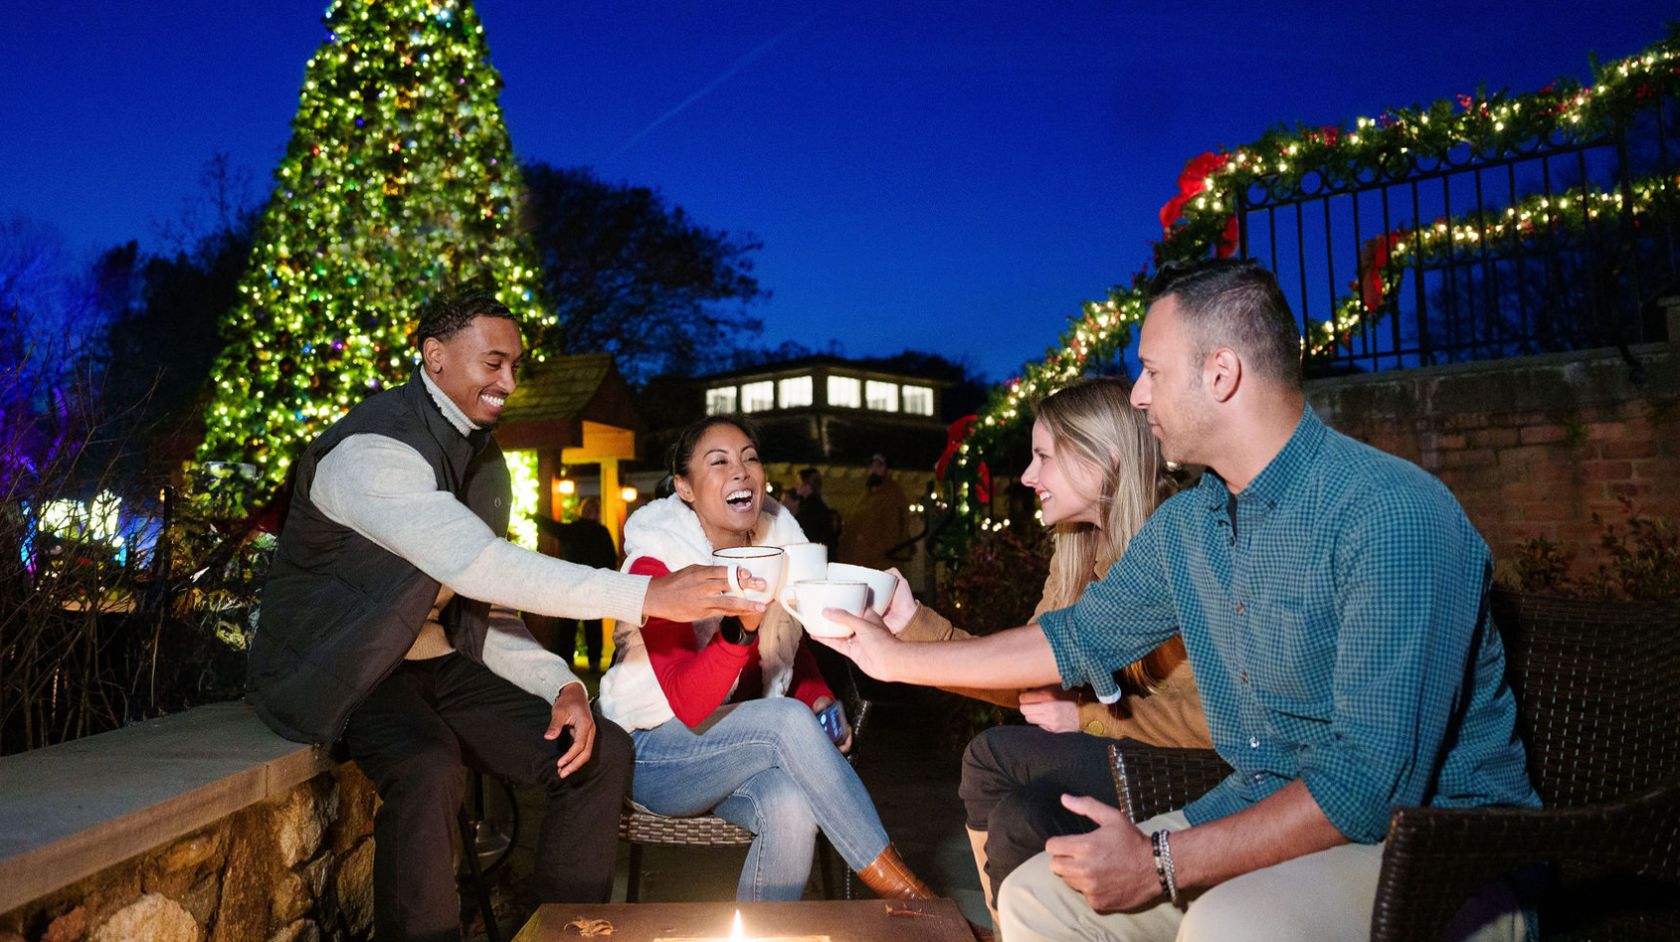 A Group Of People Sitting On A Bench In Front Of A Christmas Tree